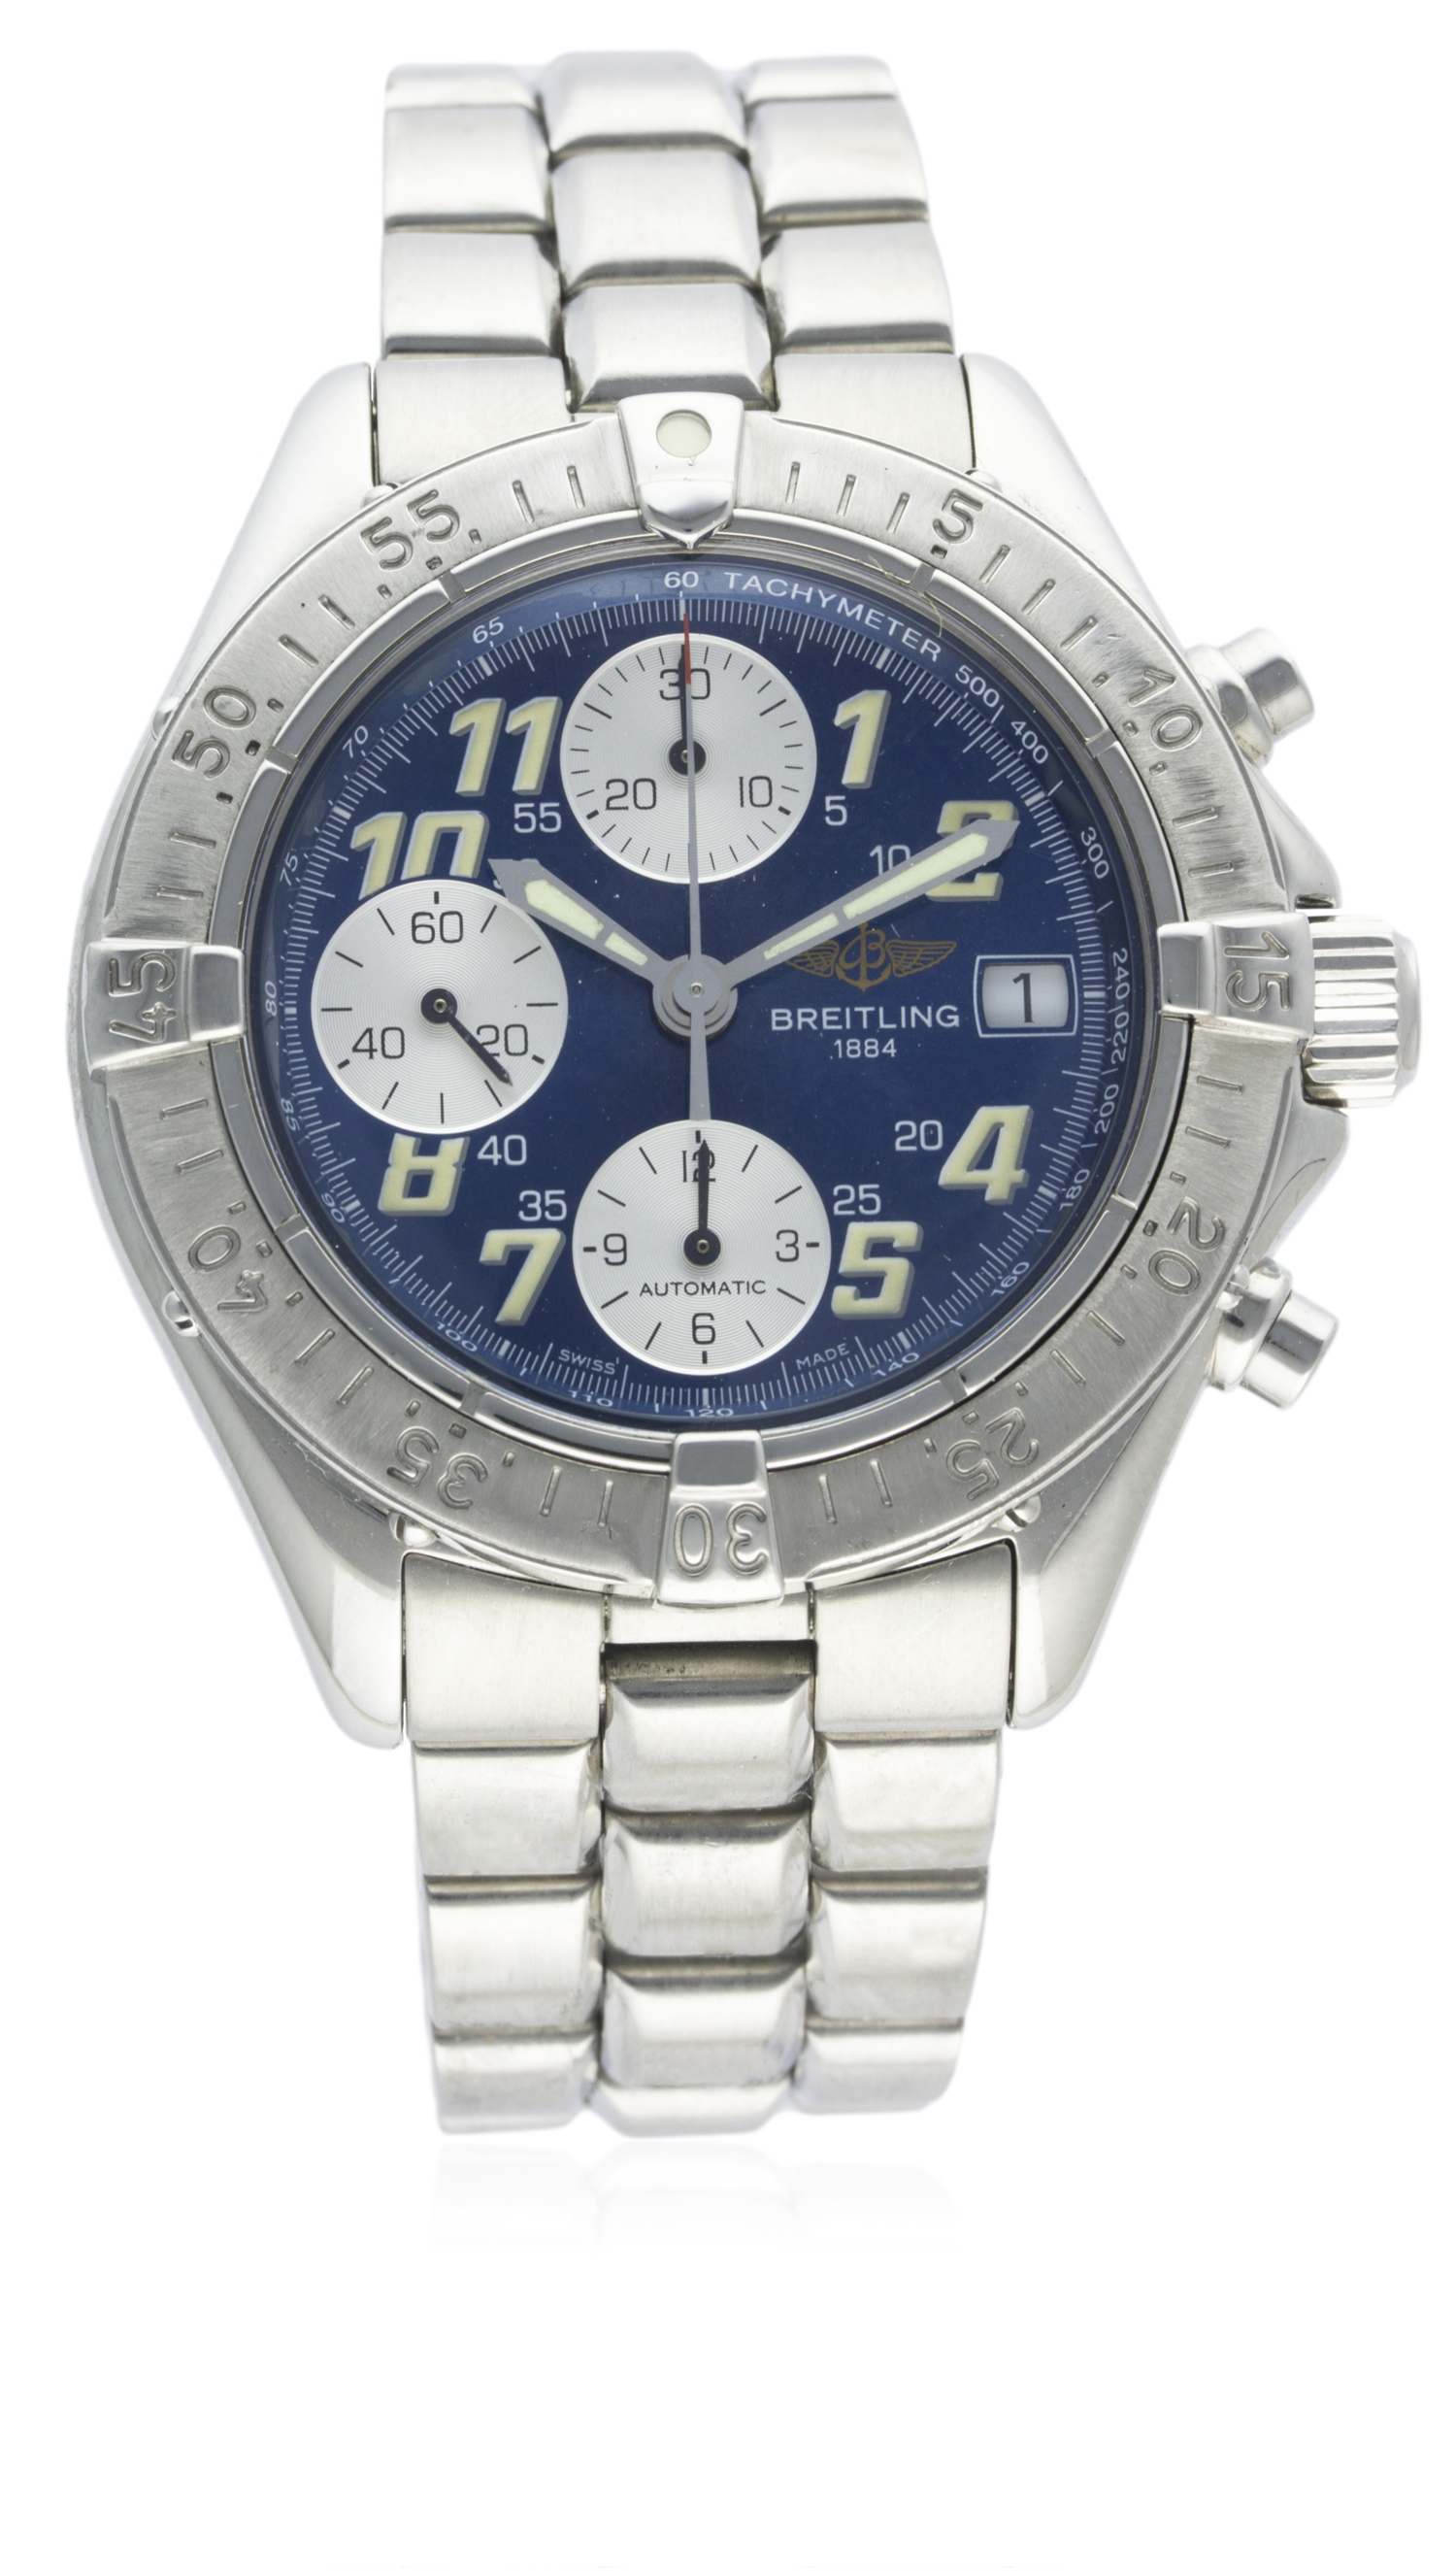 A GENTLEMAN'S STAINLESS STEEL BREITLING COLT AUTOMATIC CHRONOGRAPH BRACELET WATCH DATED 2000, REF.